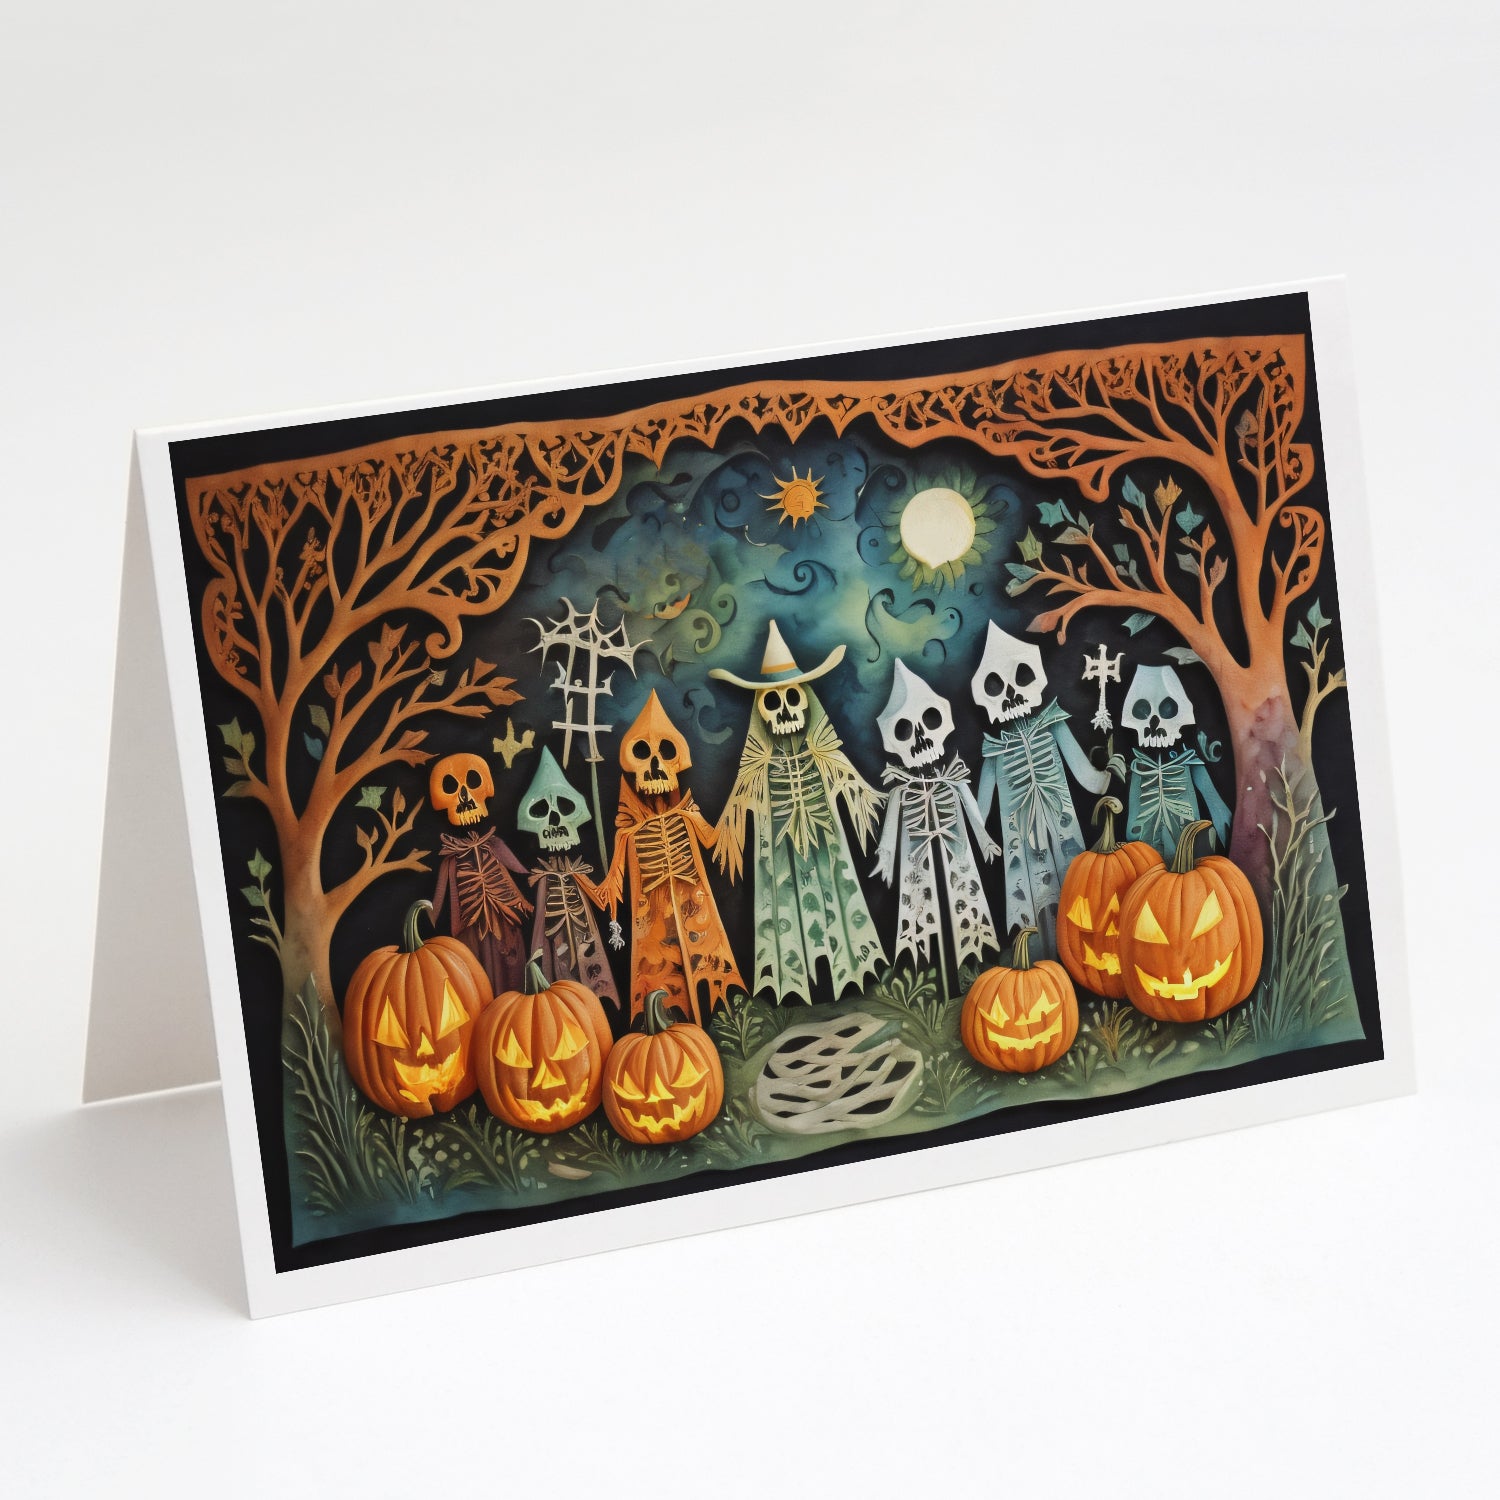 Buy this Papel Picado Skeletons Spooky Halloween Greeting Cards and Envelopes Pack of 8